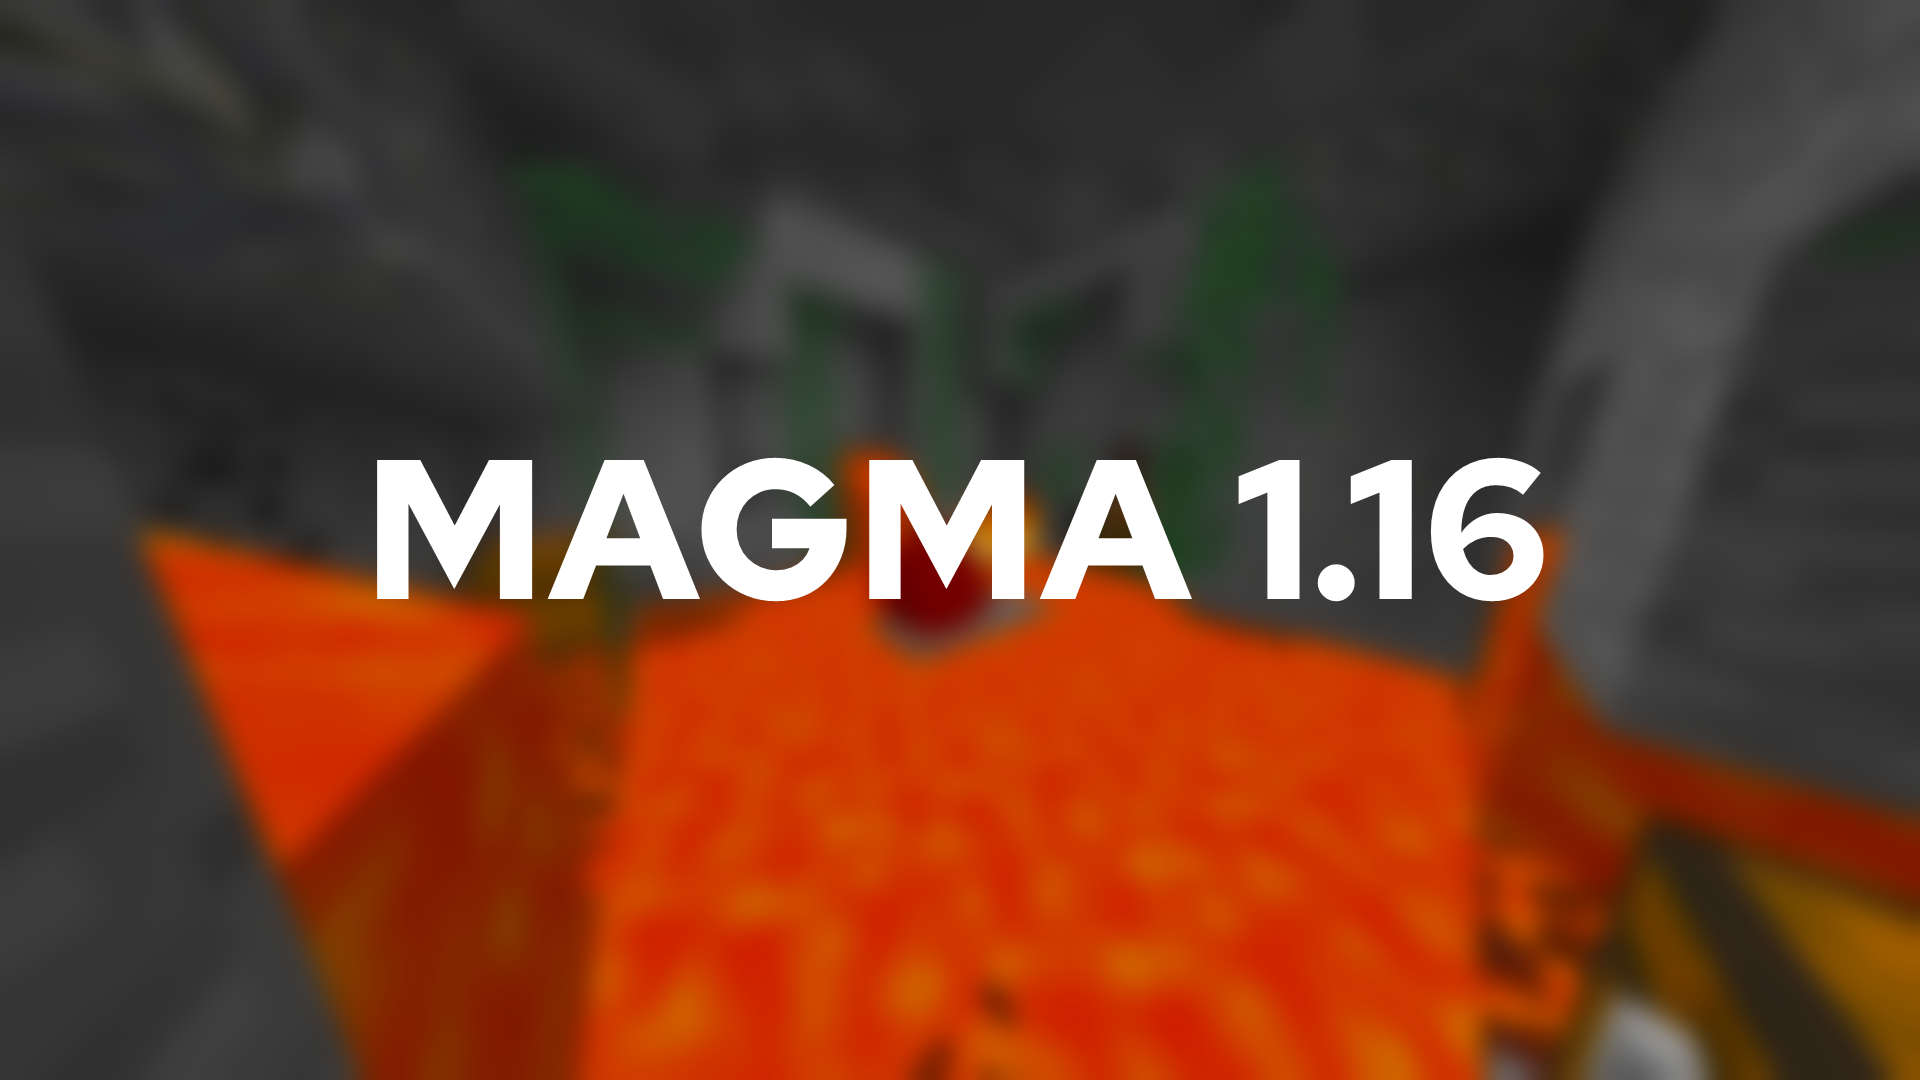 The end of Magma 1.16